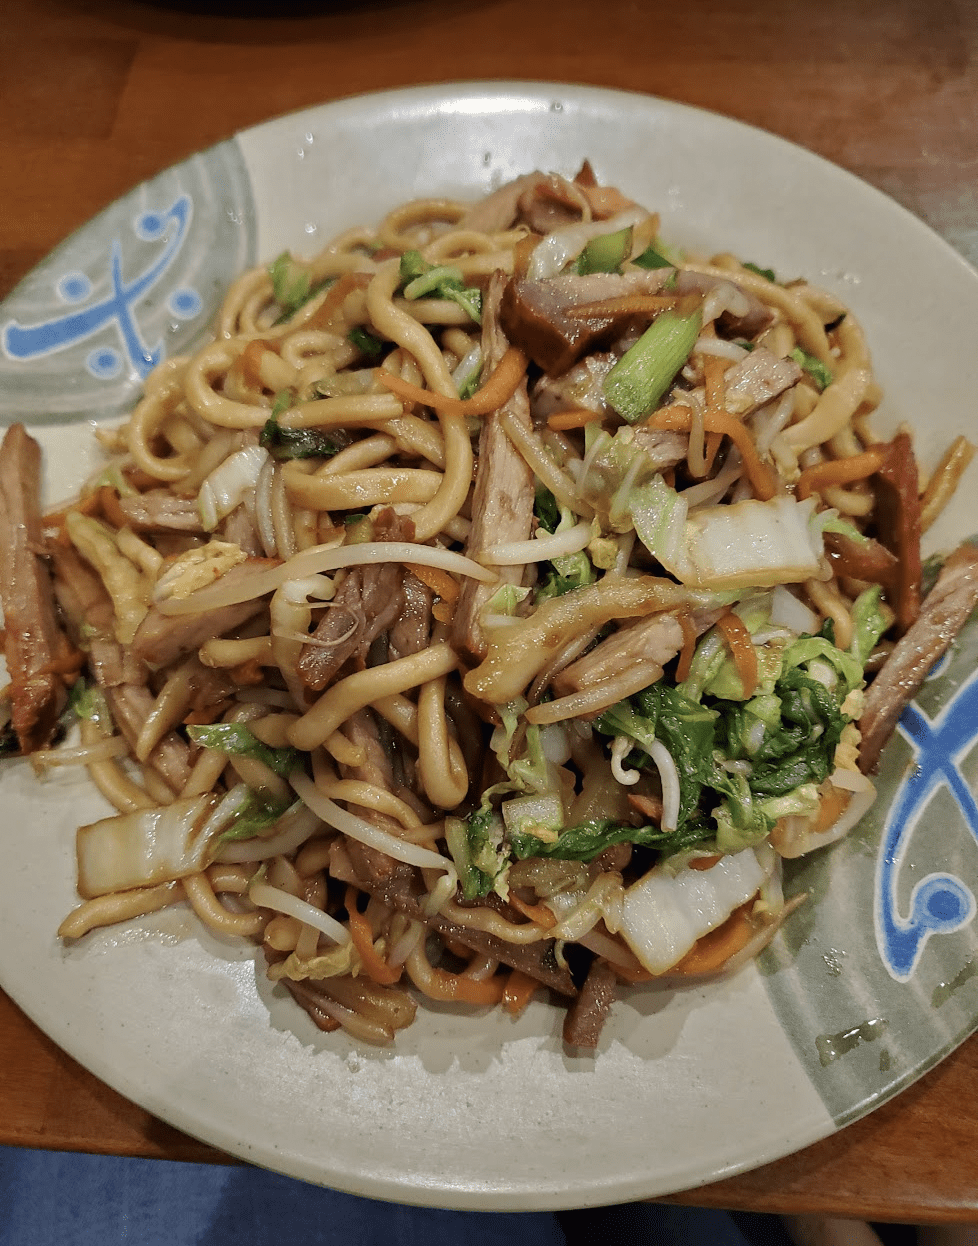 Pan fried noodles at Tasty Hand Pulled Noodles II, one of the best cheap eats in Midtown, New York City